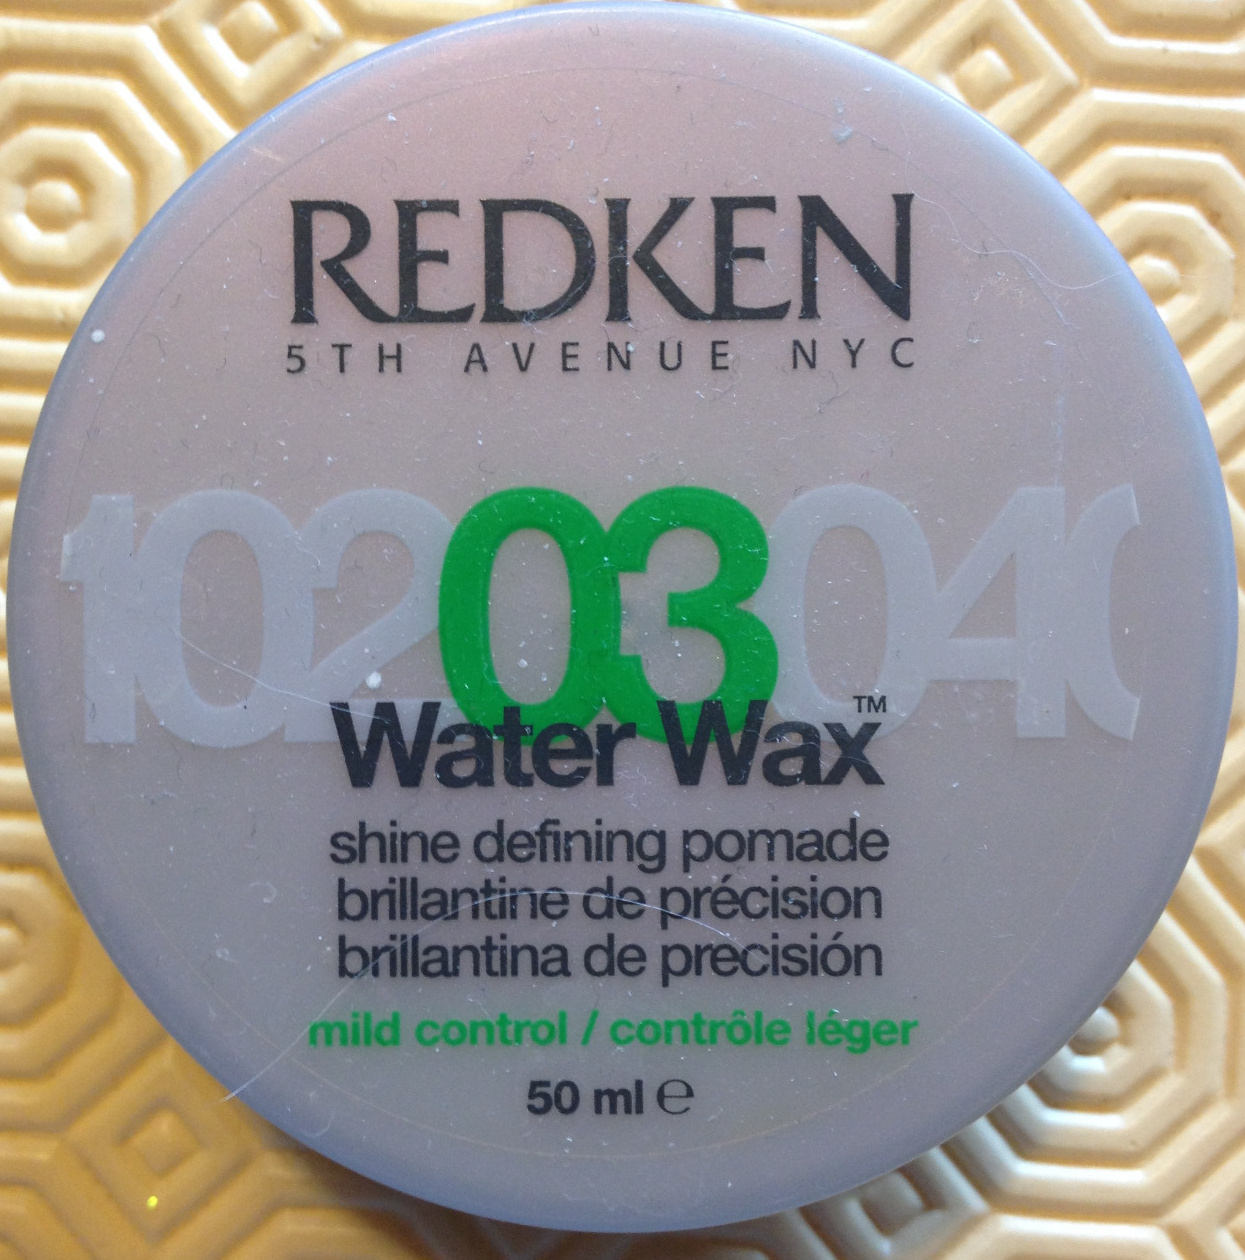 03 Water Wax - Product - fr